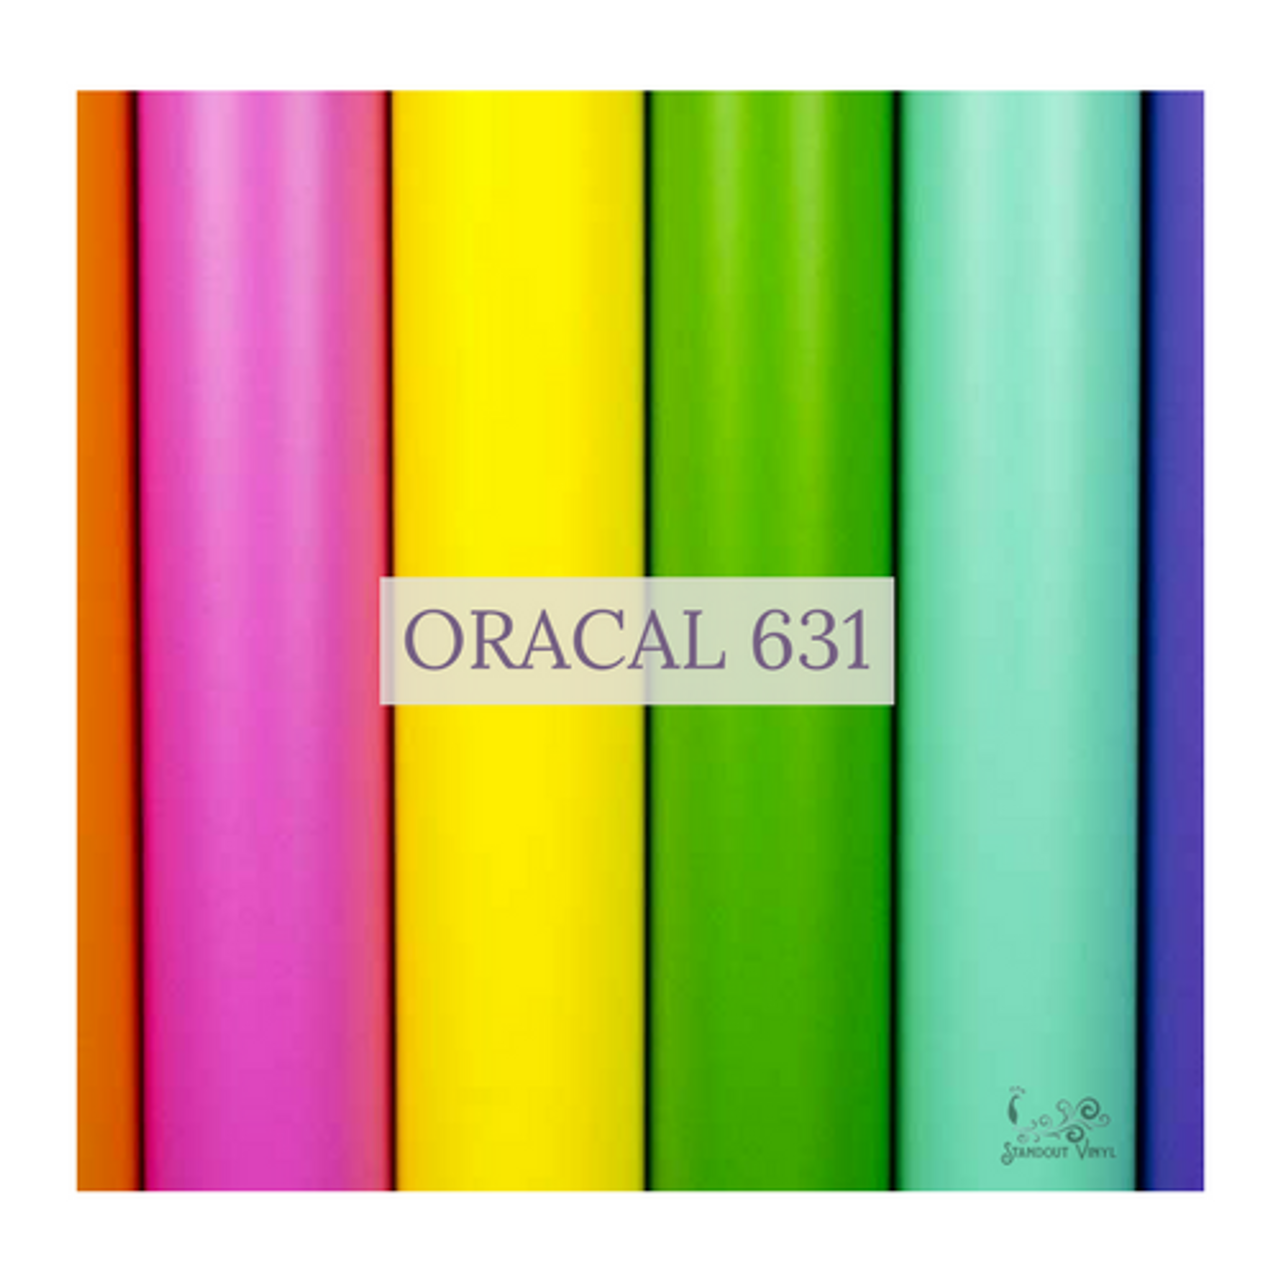 Oracal 631 Removable Craft Vinyl Rolls Only $3.25